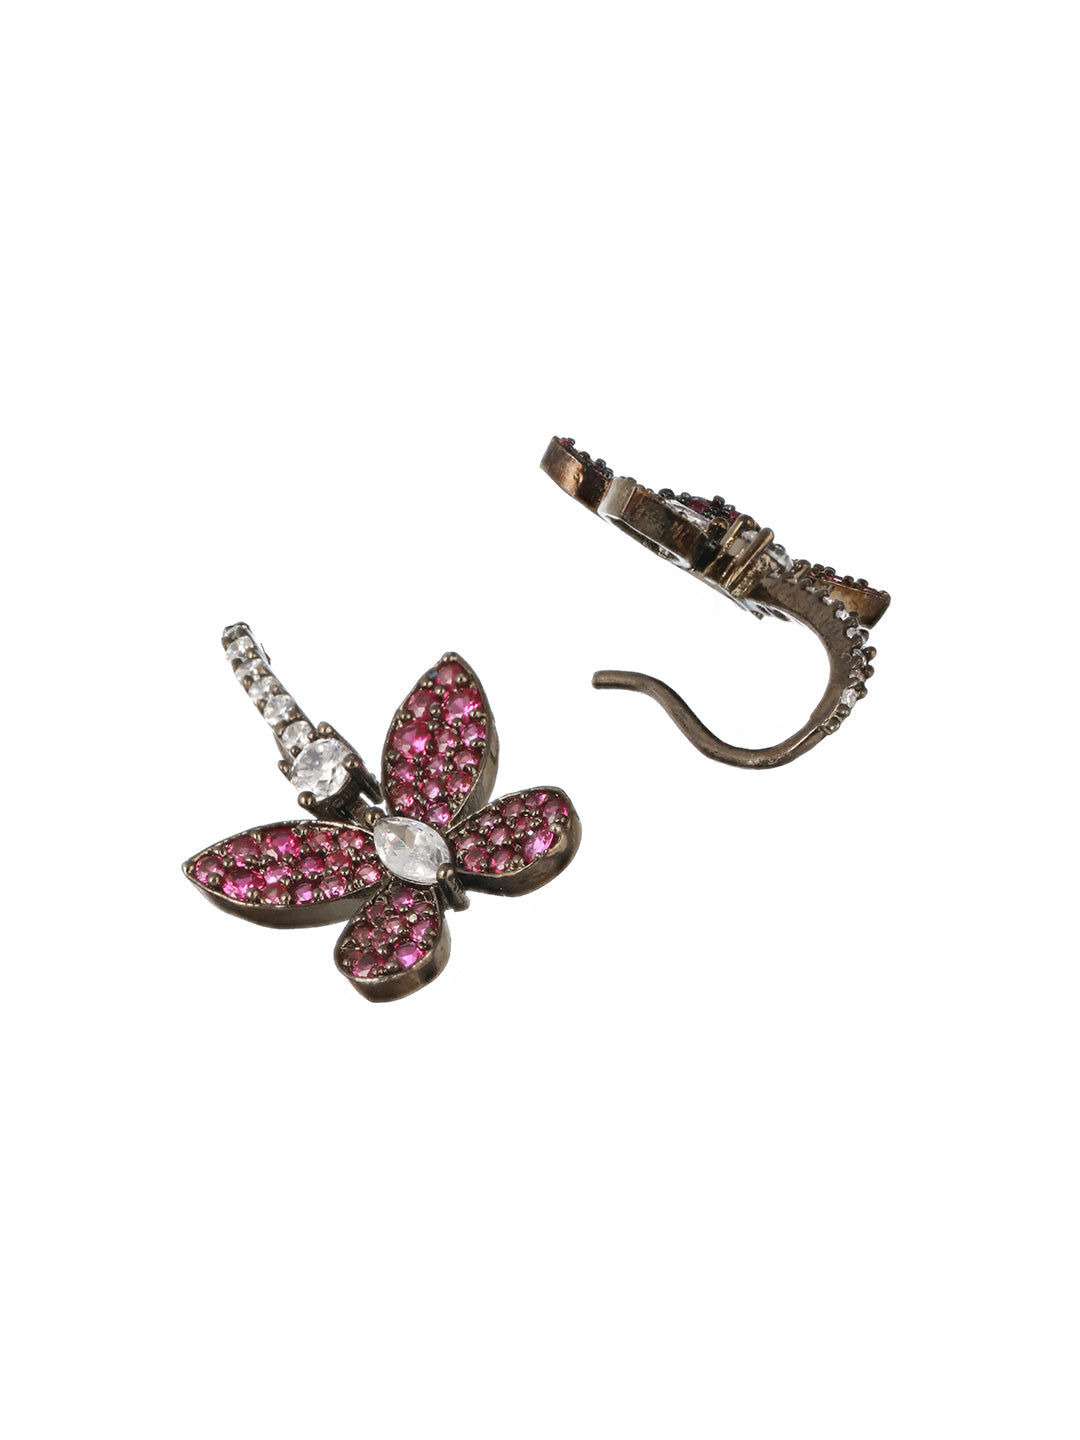 Priyaasi Purple Butterly AD Stone Studded Silver-Plated Drop Earrings